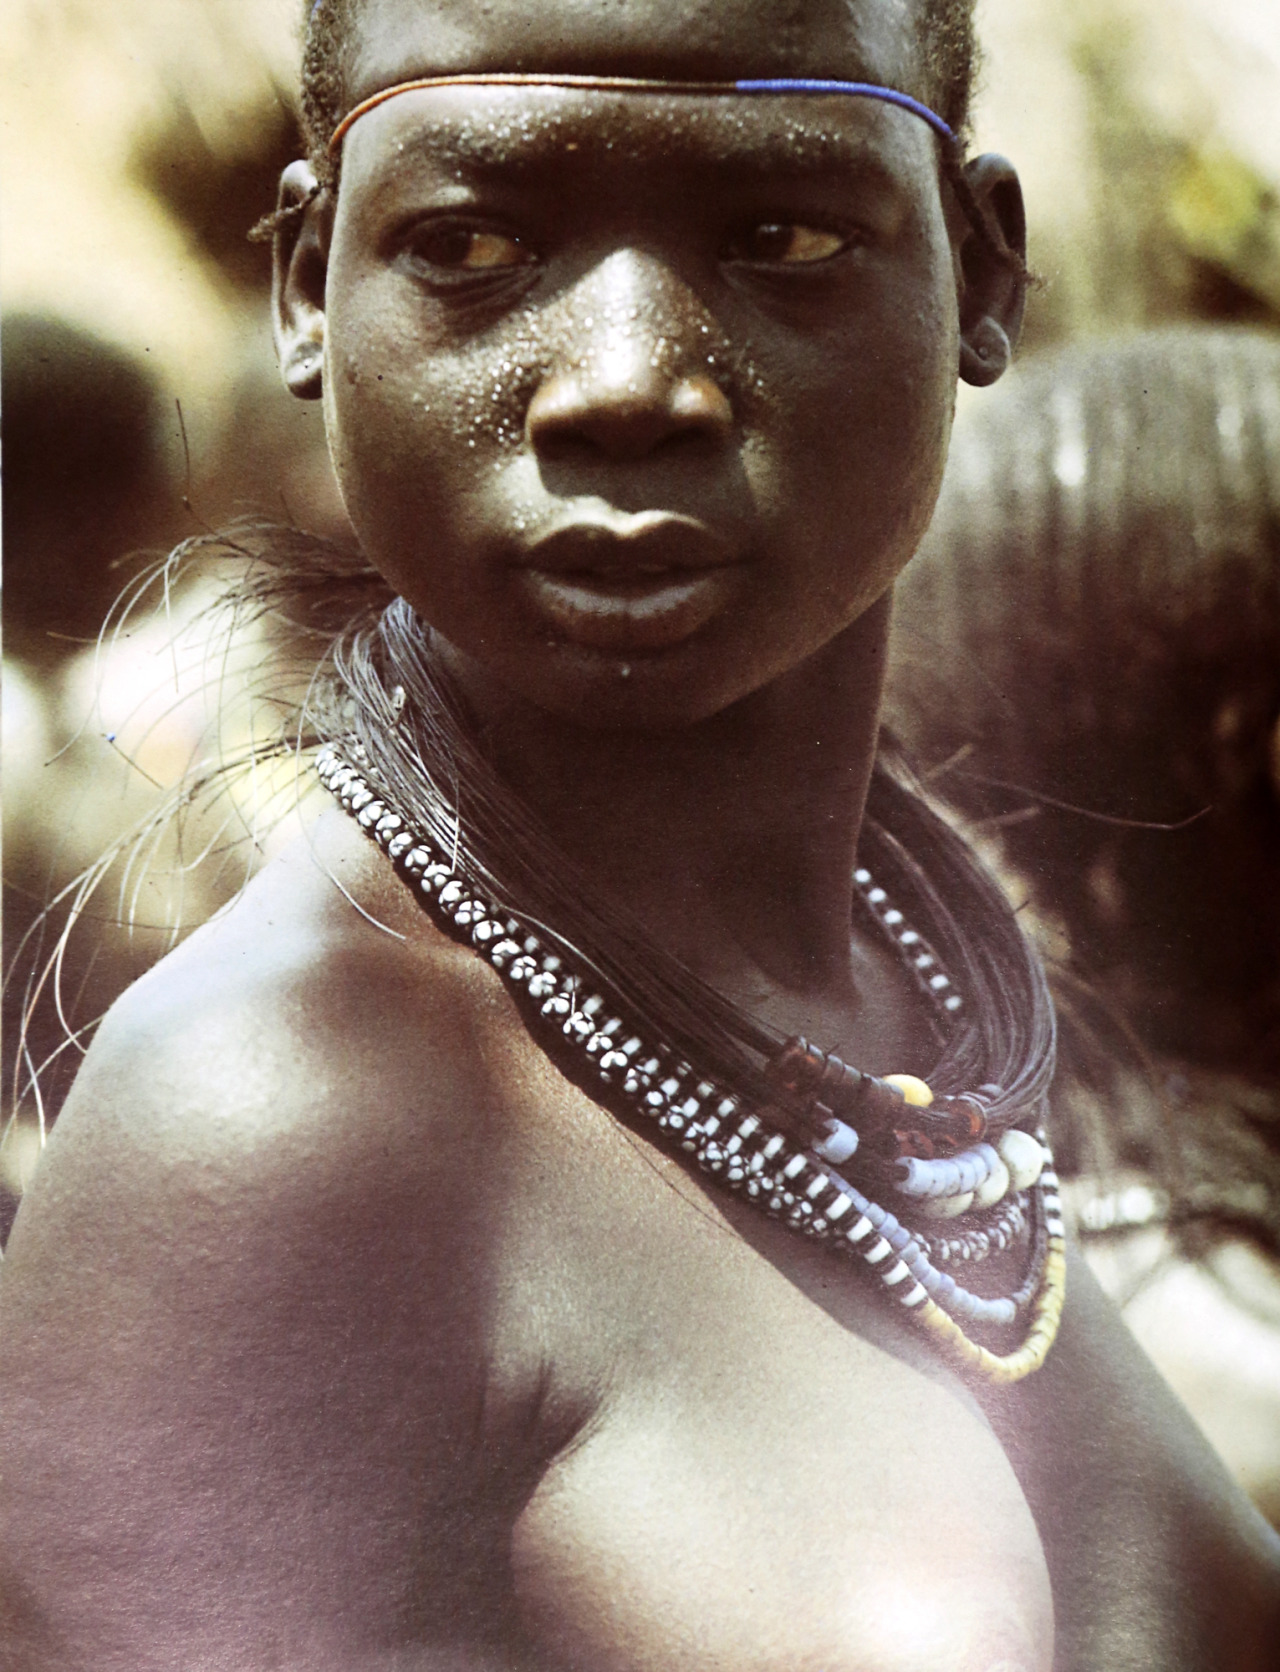 African girl, from African Visions: The Diary of an African Photographer, by Mirella